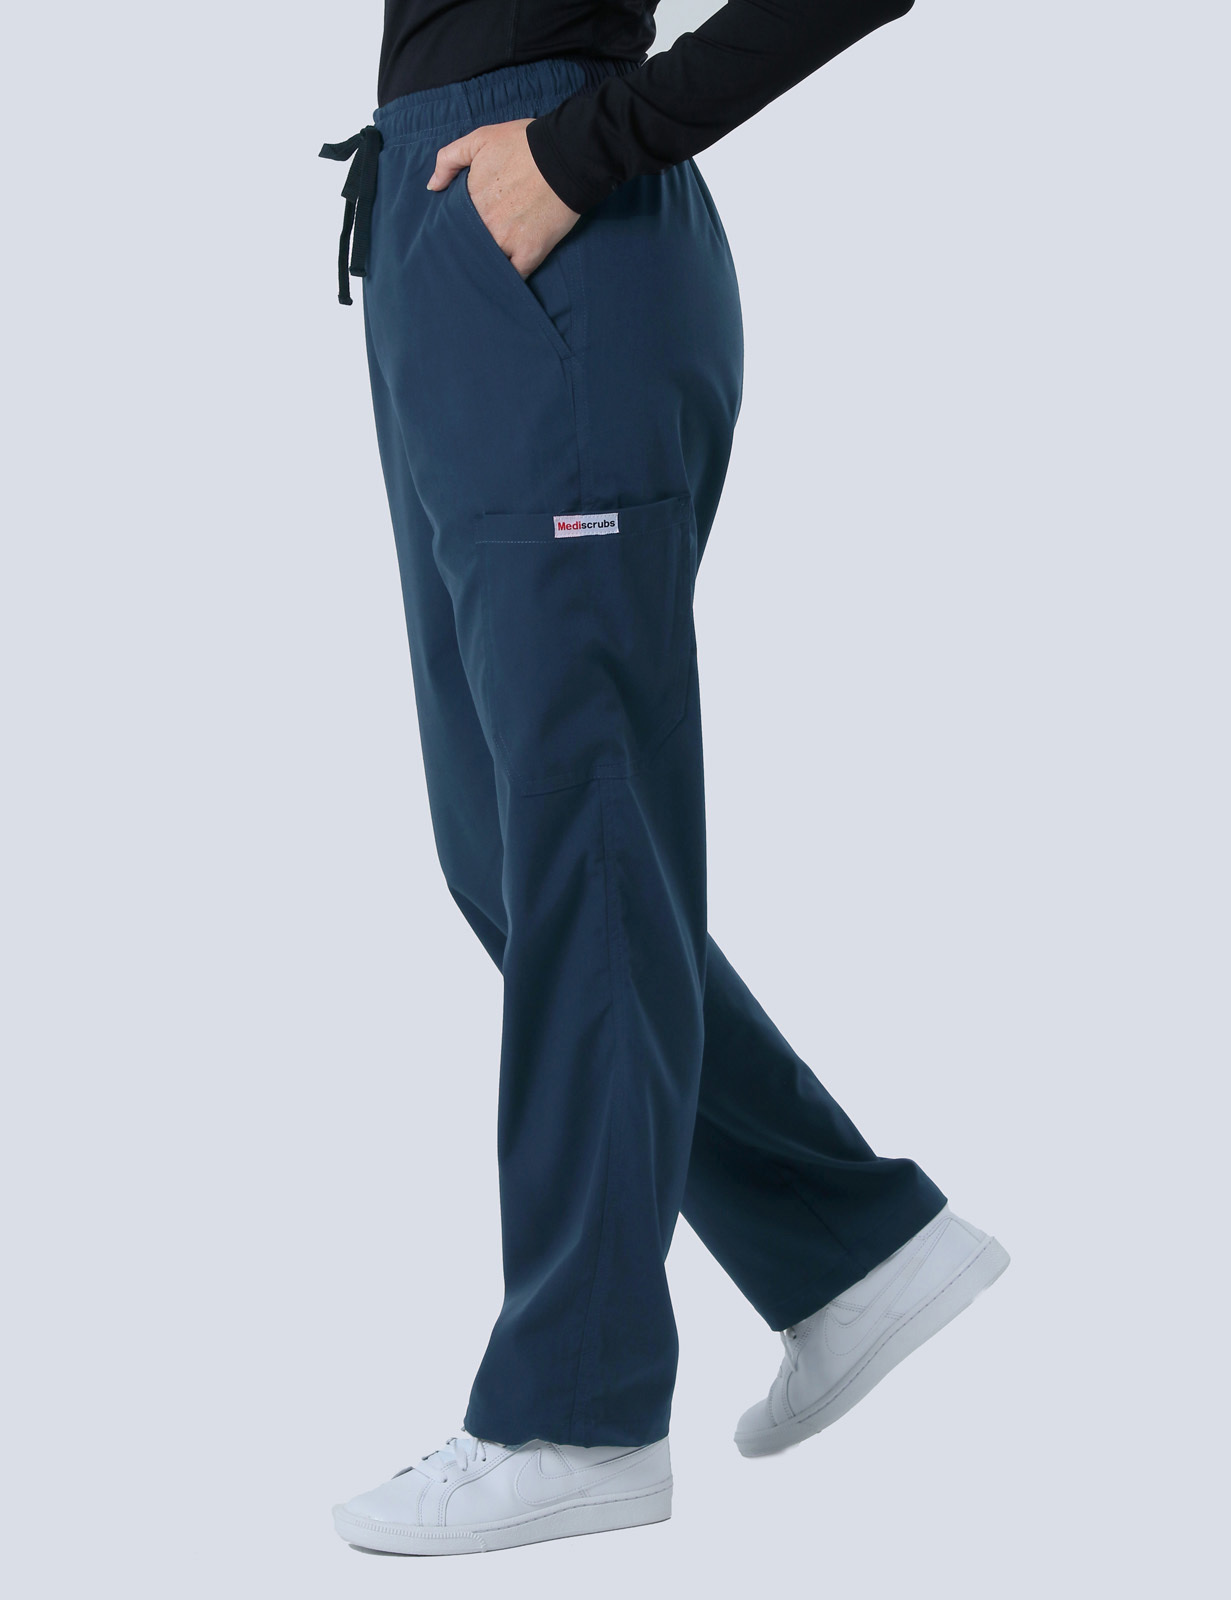 The Alfred Hospital - Emergency Department (4 Pocket Scrub Top and Cargo Pants in Navy incl Logos)